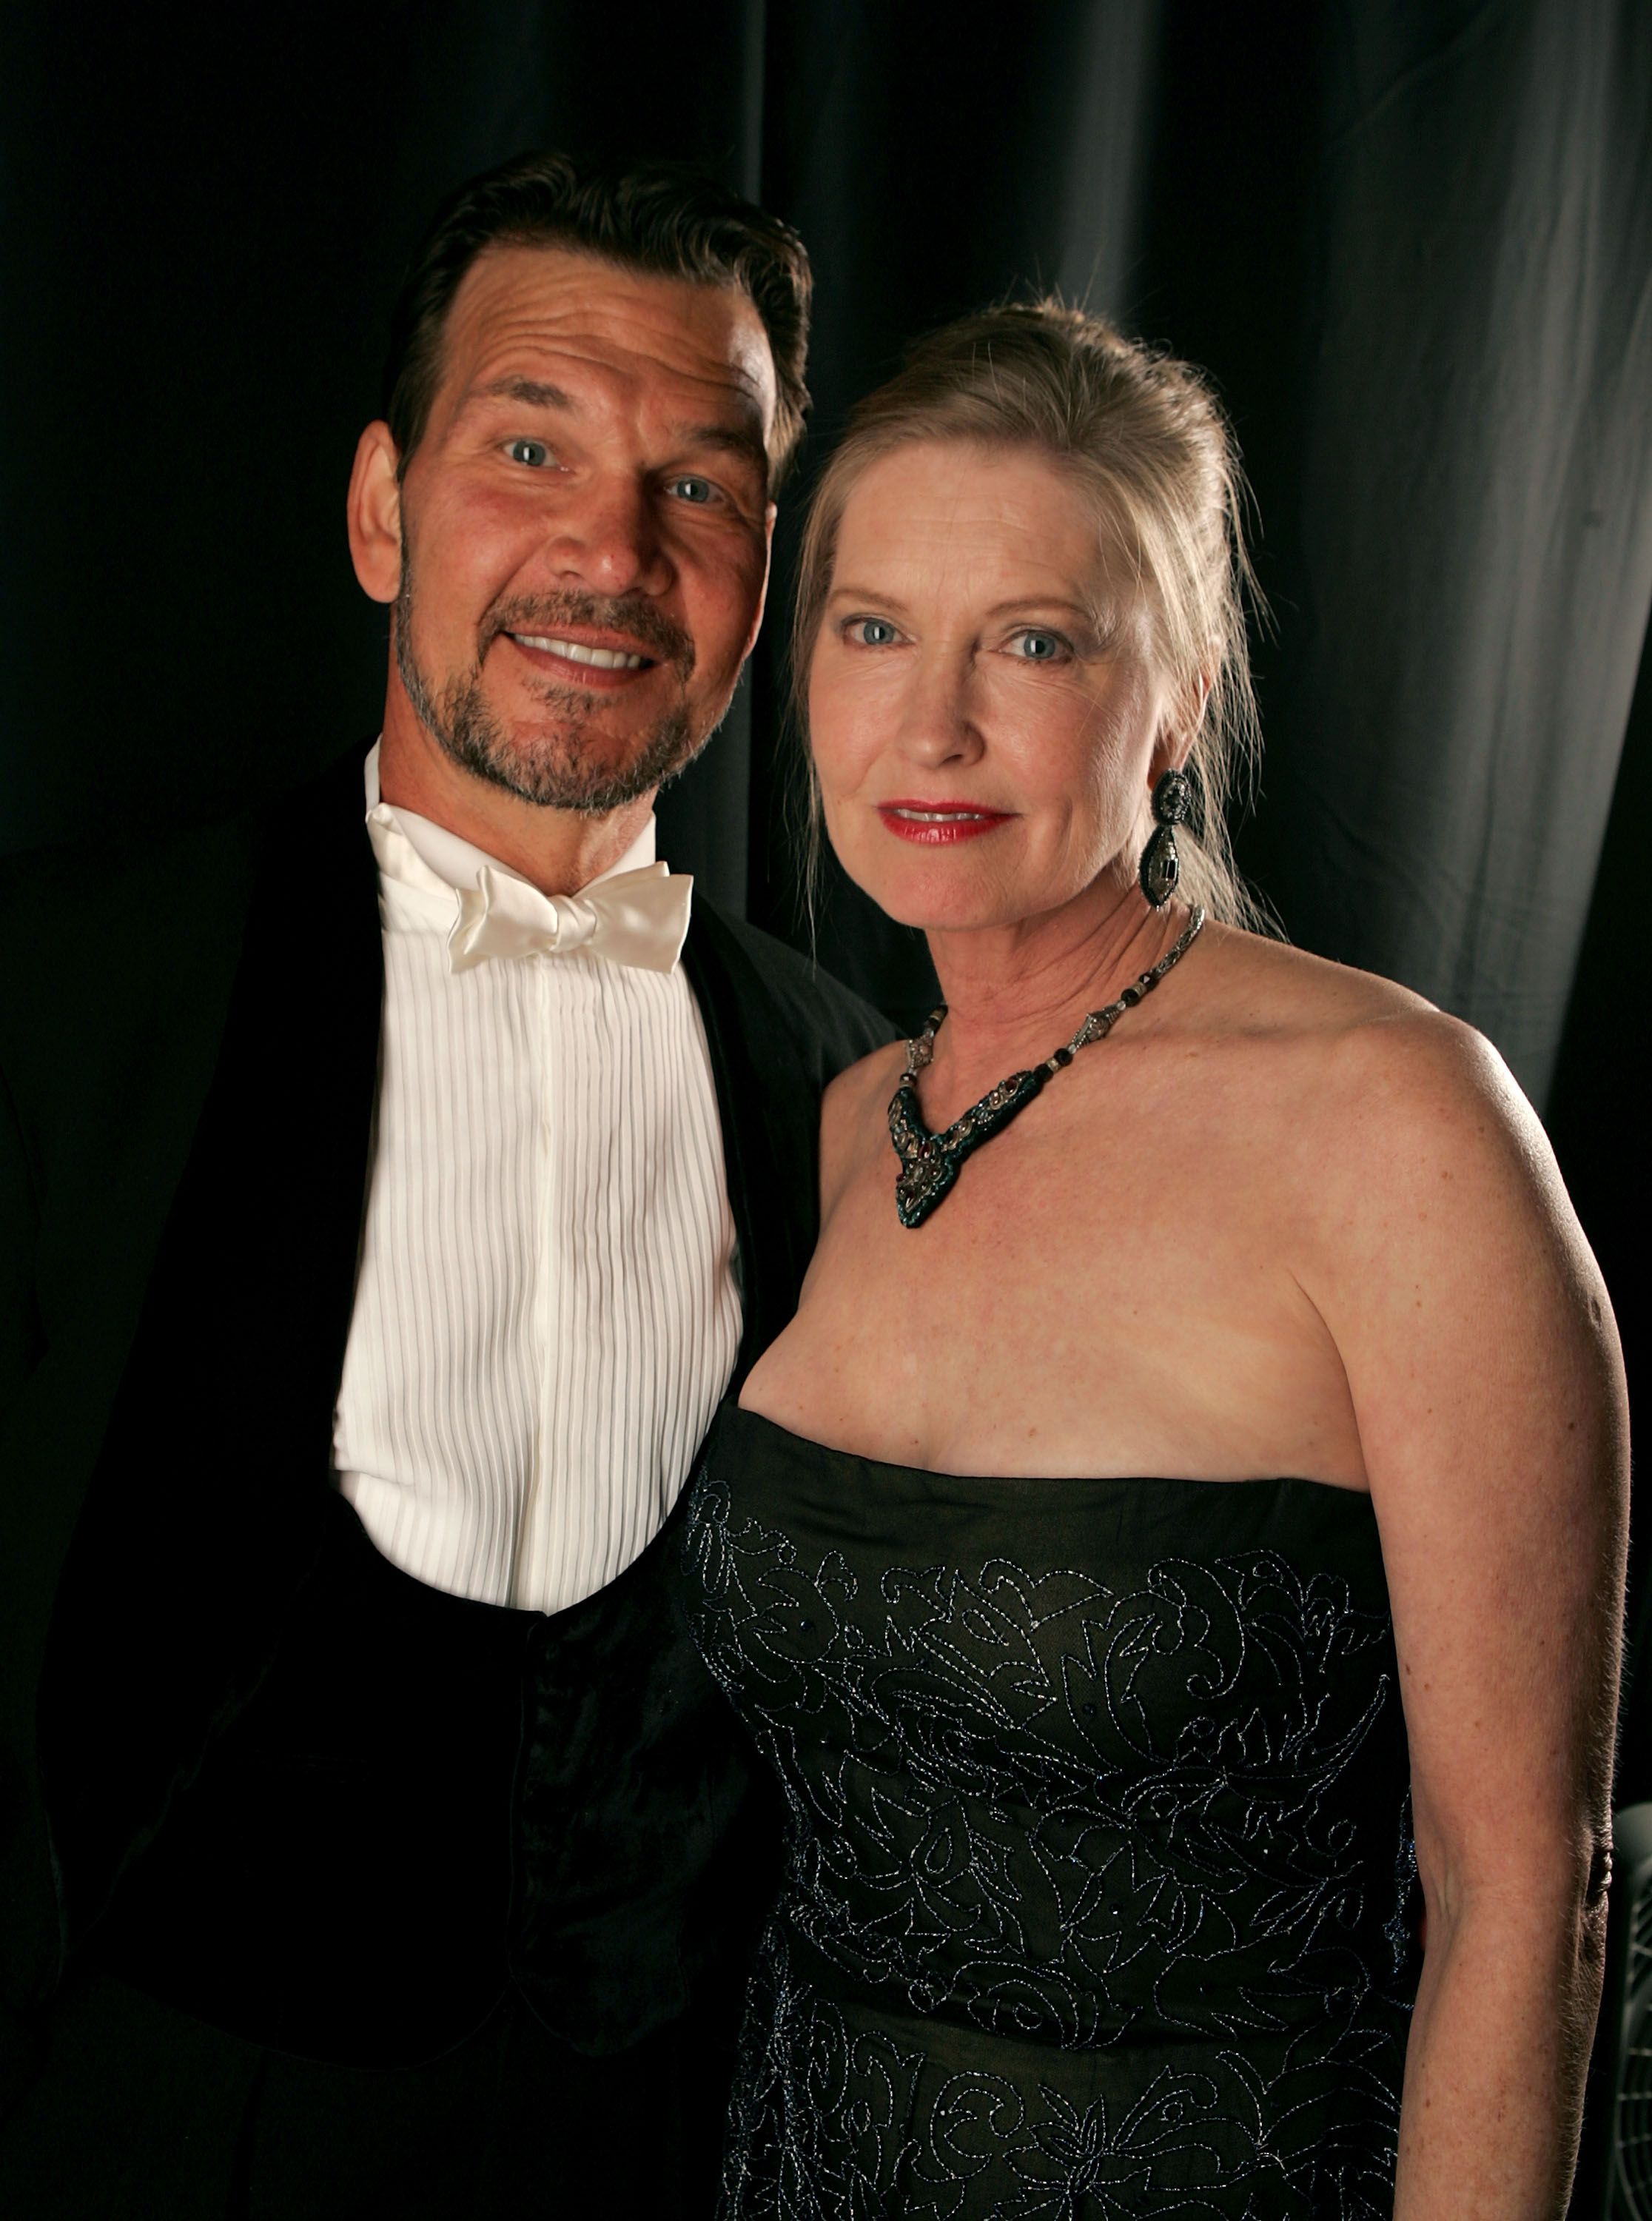 Patrick Swayze and his wife Lisa Niemi pose backstage during the 9th annual Costume Designers Guild Awards on February 17, 2007, in Beverly Hills, California | Photo: Mark Mainz/Getty Images